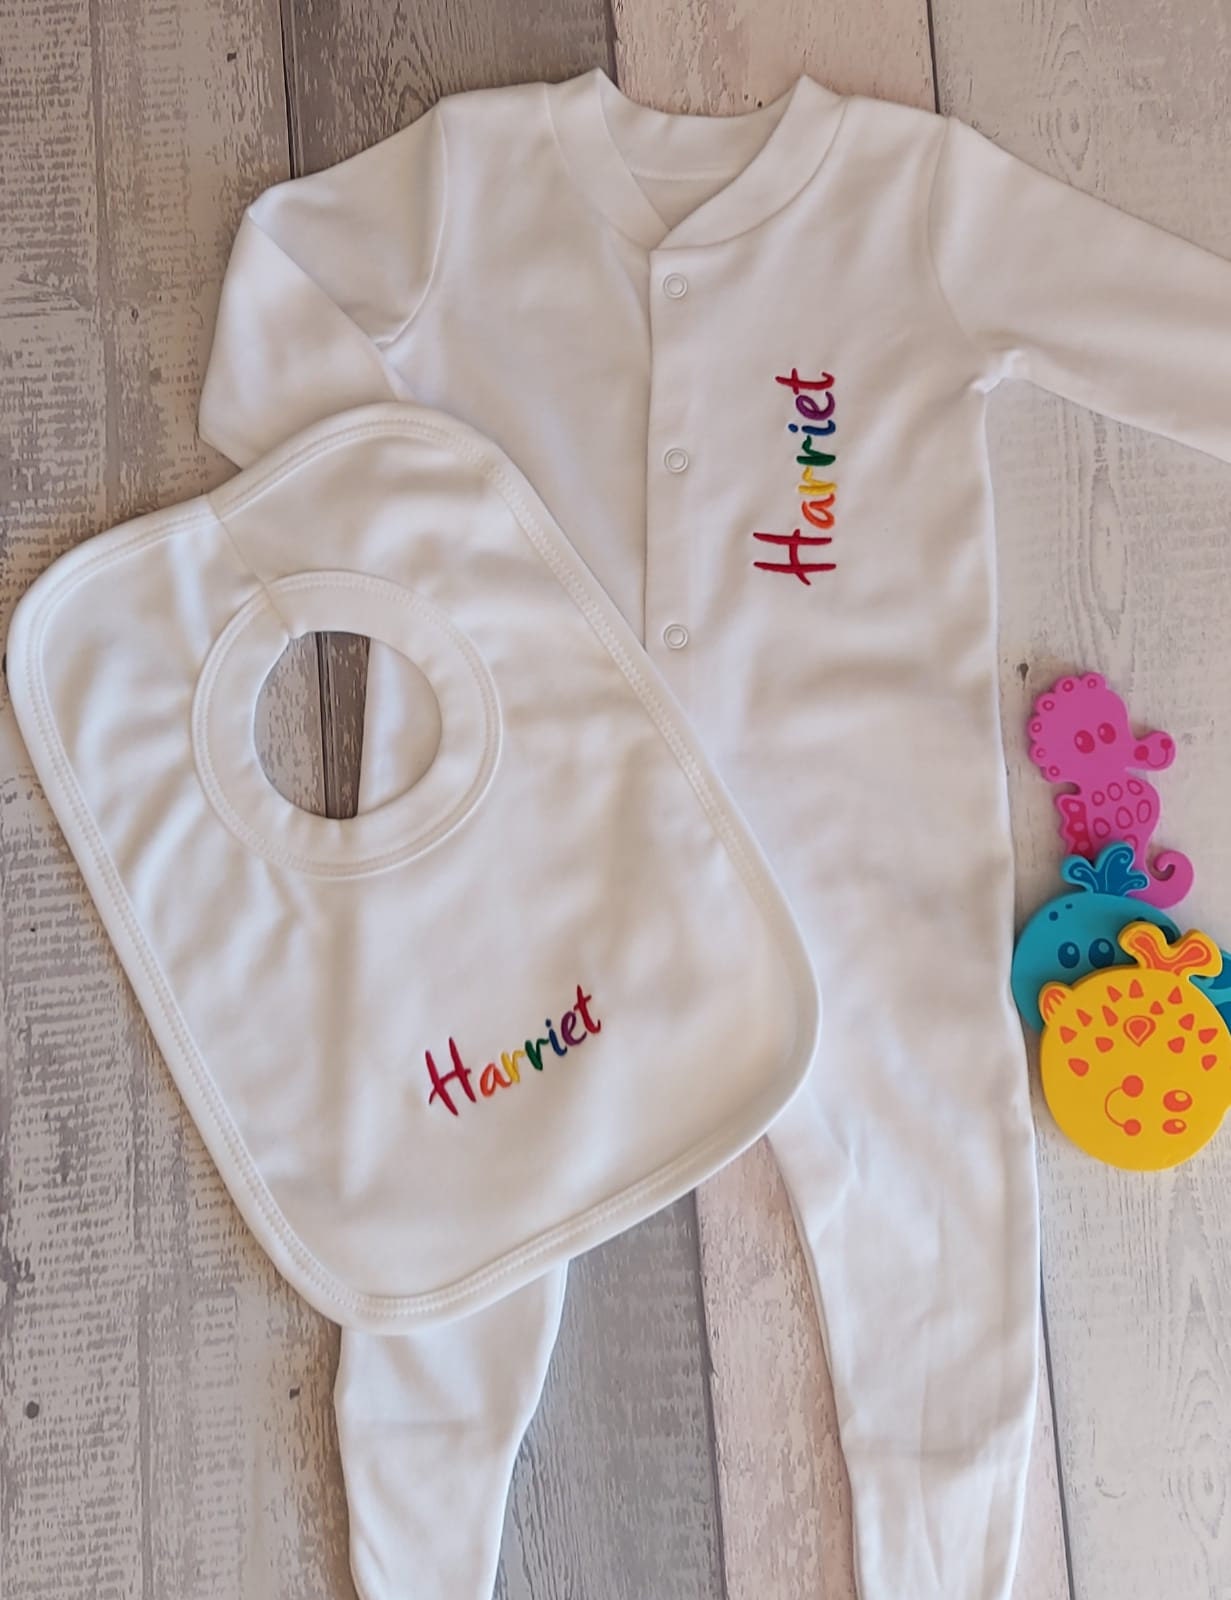 Sleepsuit Embroidered Royal Baby Crown Gift Personalised Baby grow Bib Set 